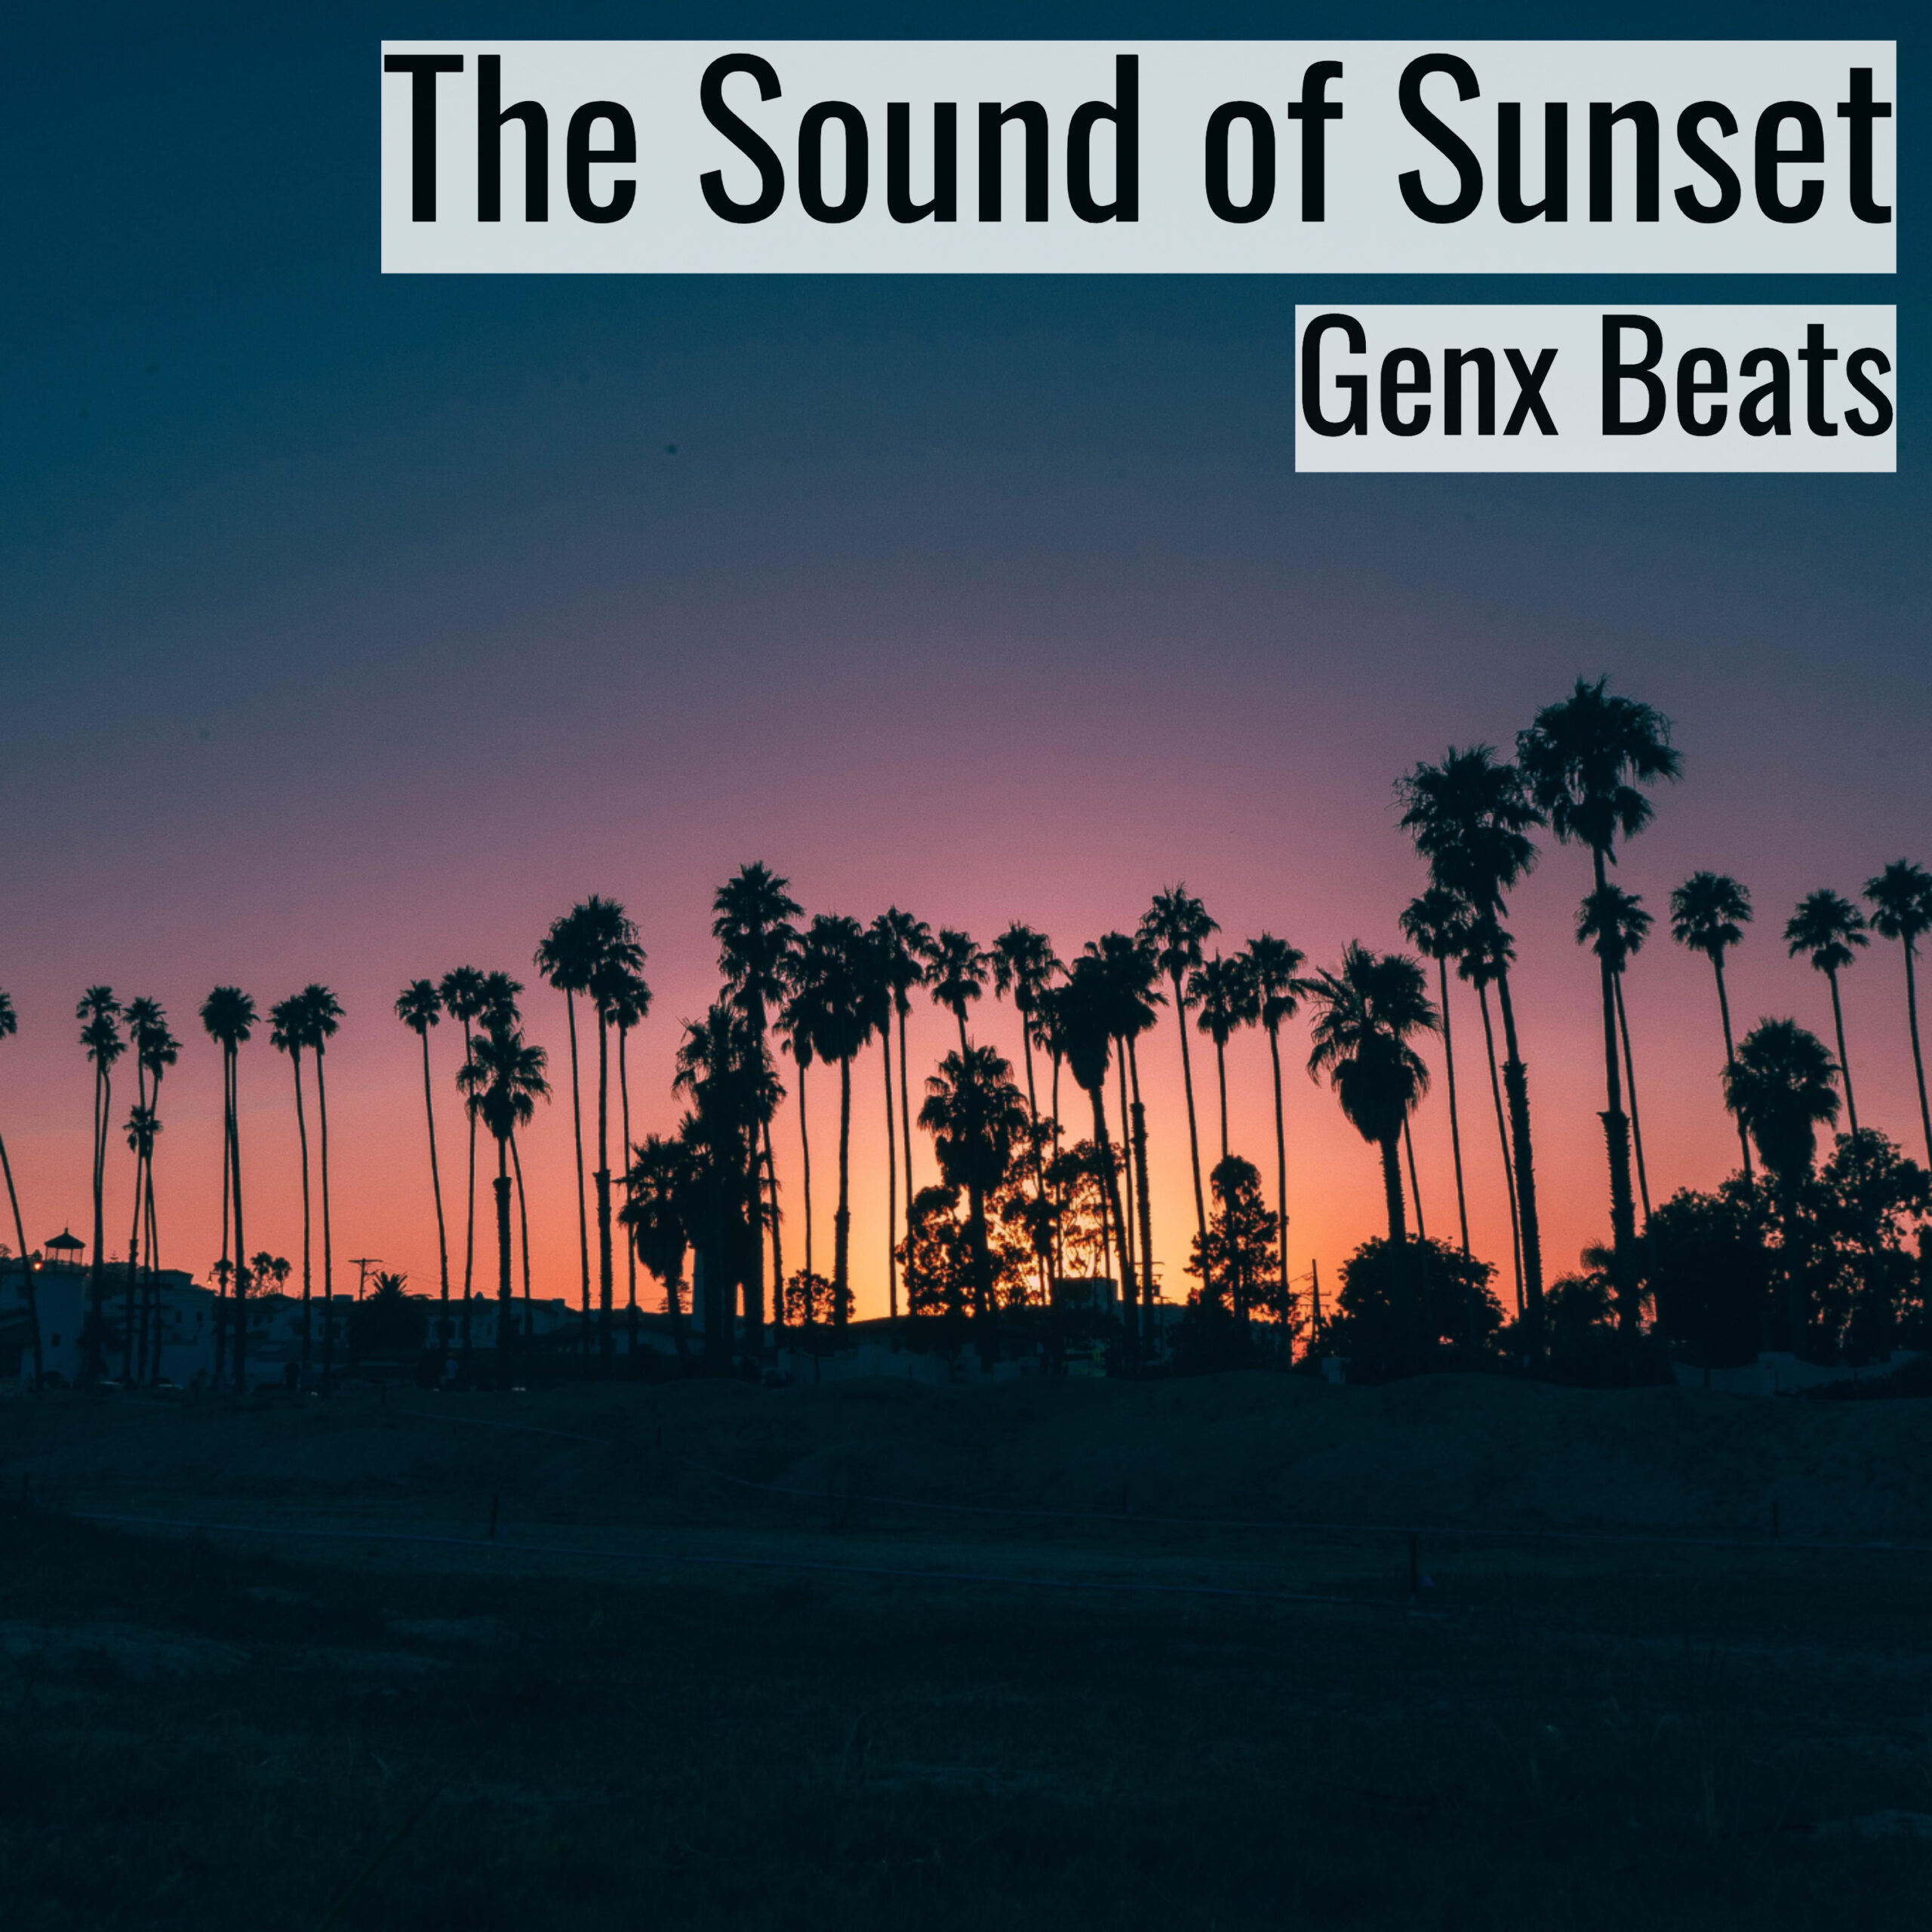 The Sound of Sunset scaled